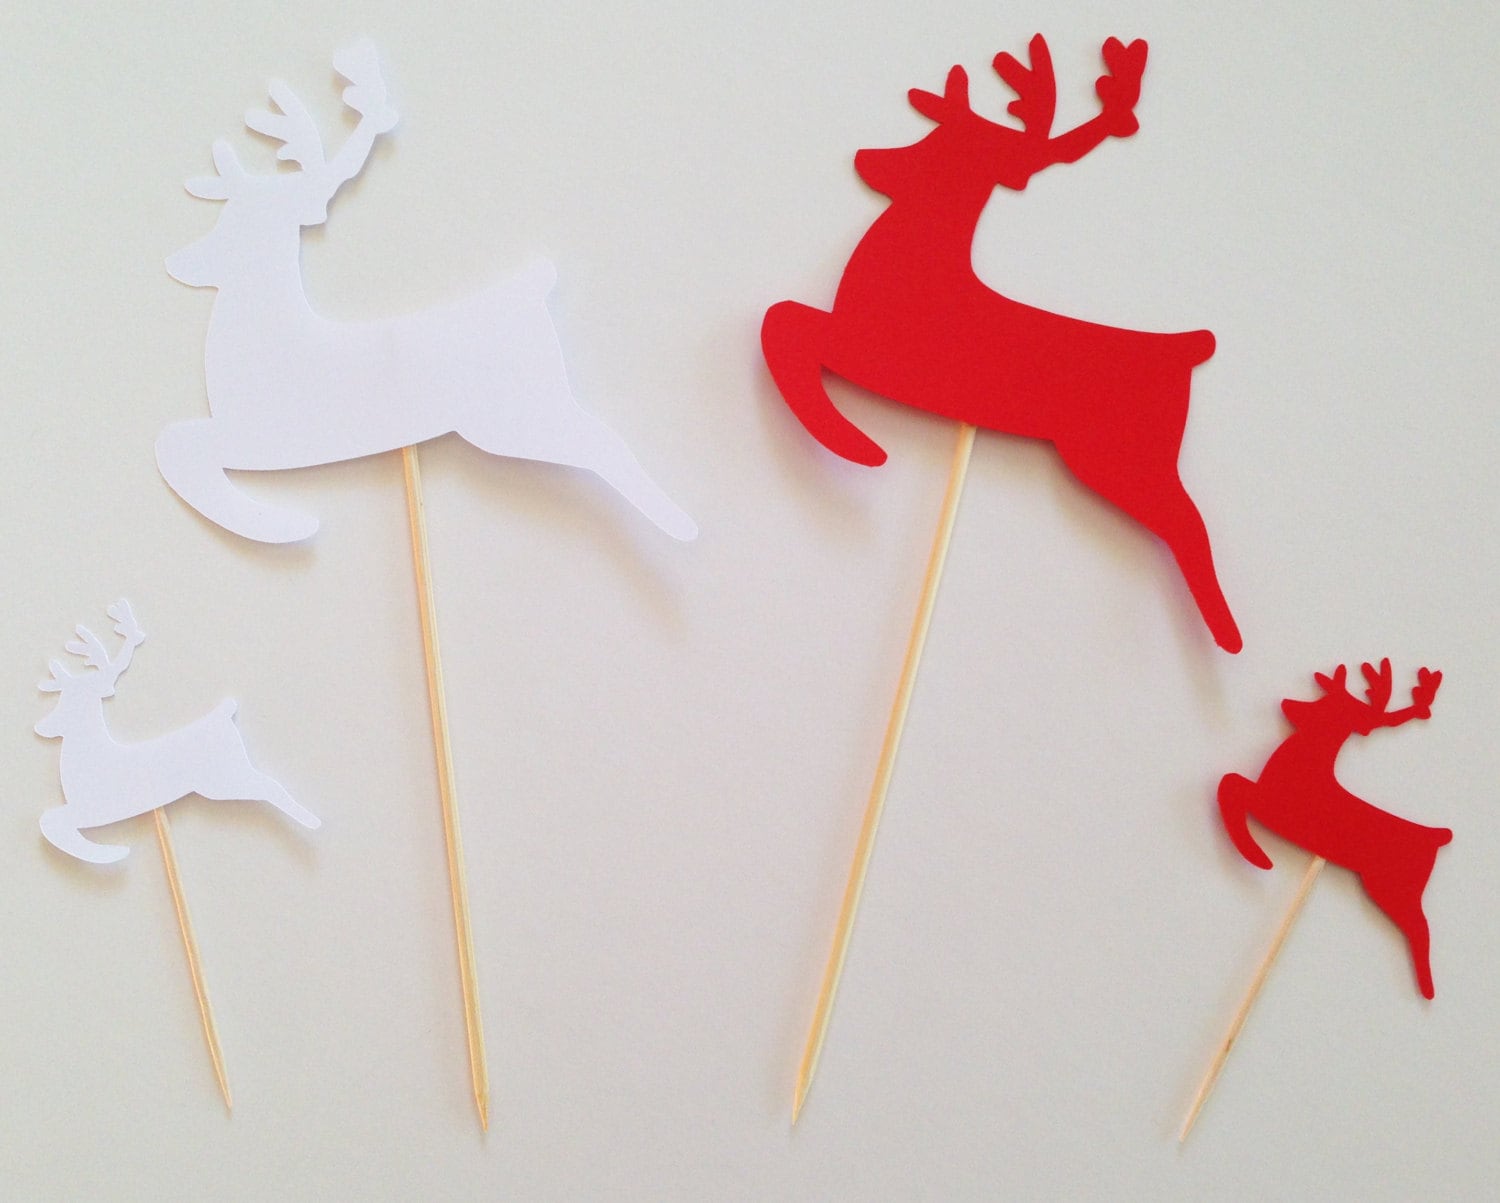 Cupcake Toppers With White and Red Reindeer Decoration - Etsy